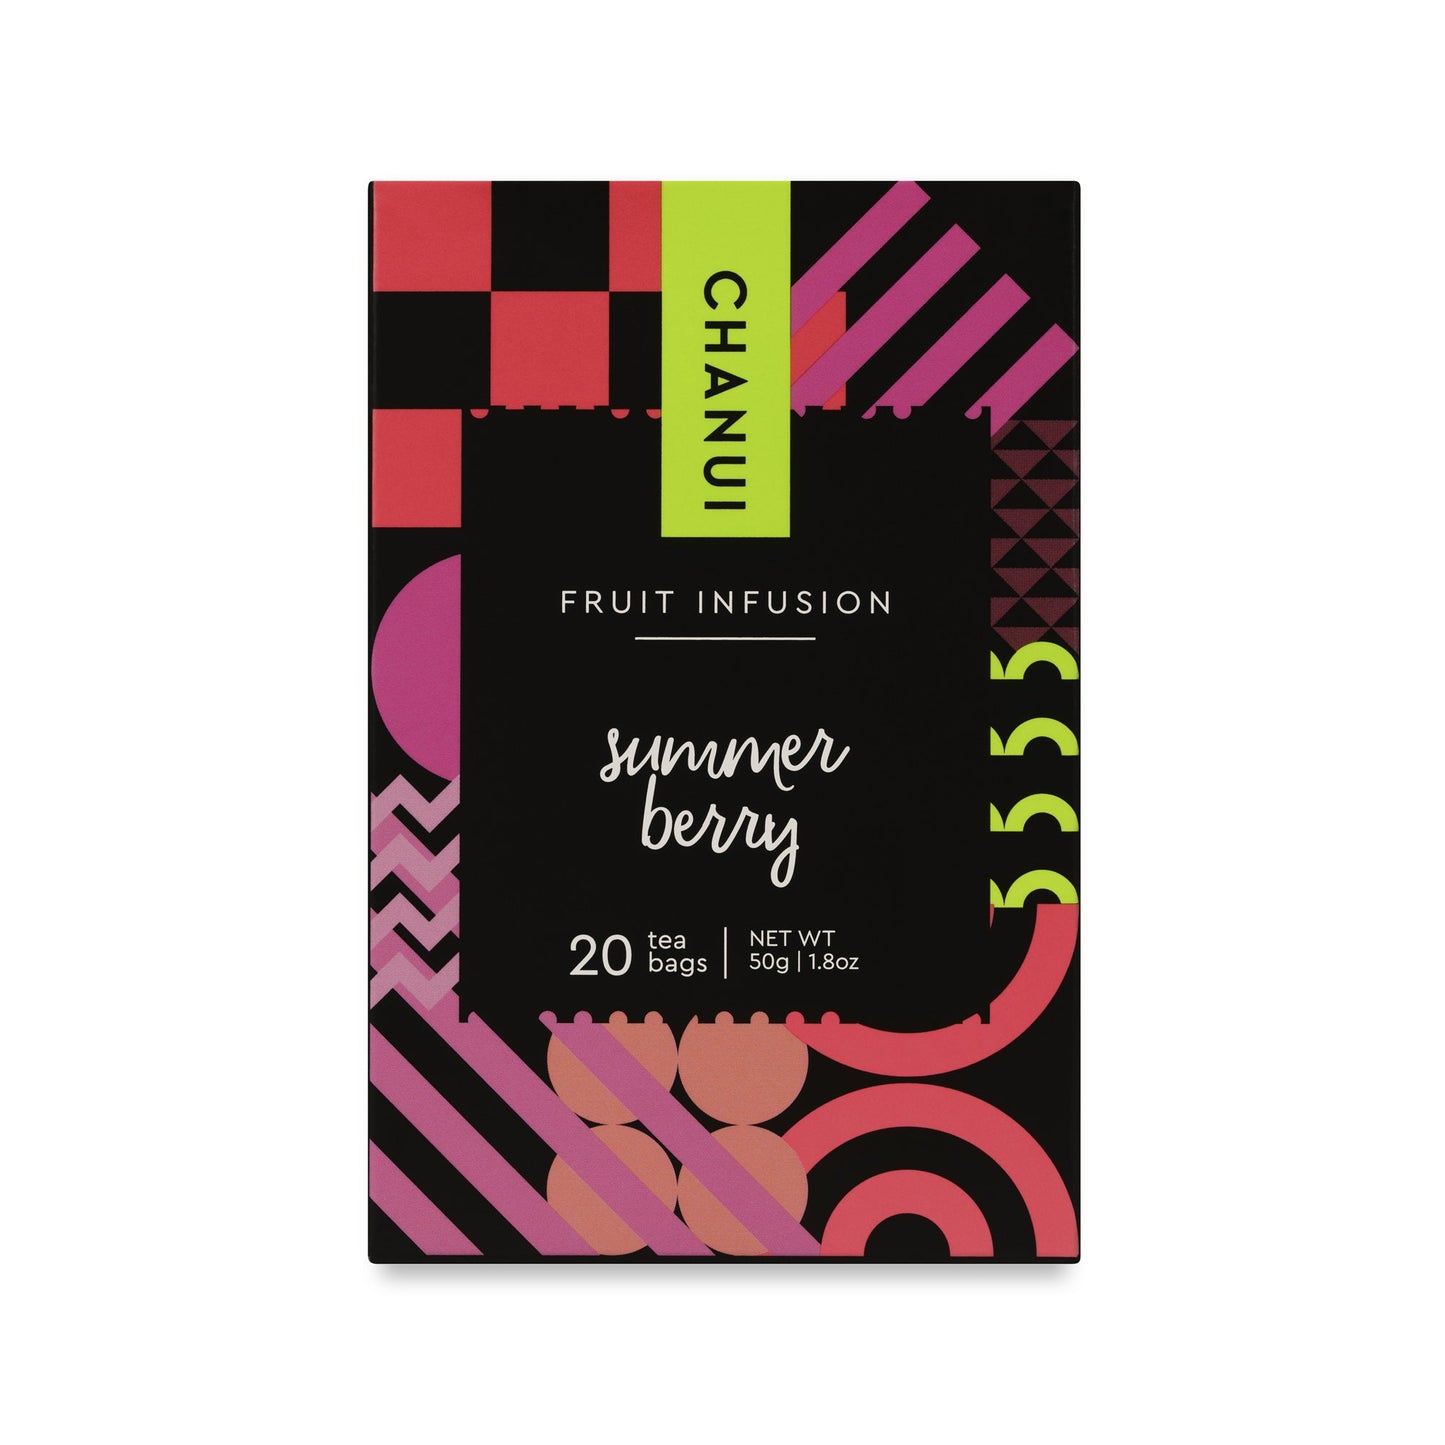 Red, Pink and Black box of Chanui Fruit Infusion Summer Berry 20 Teabags